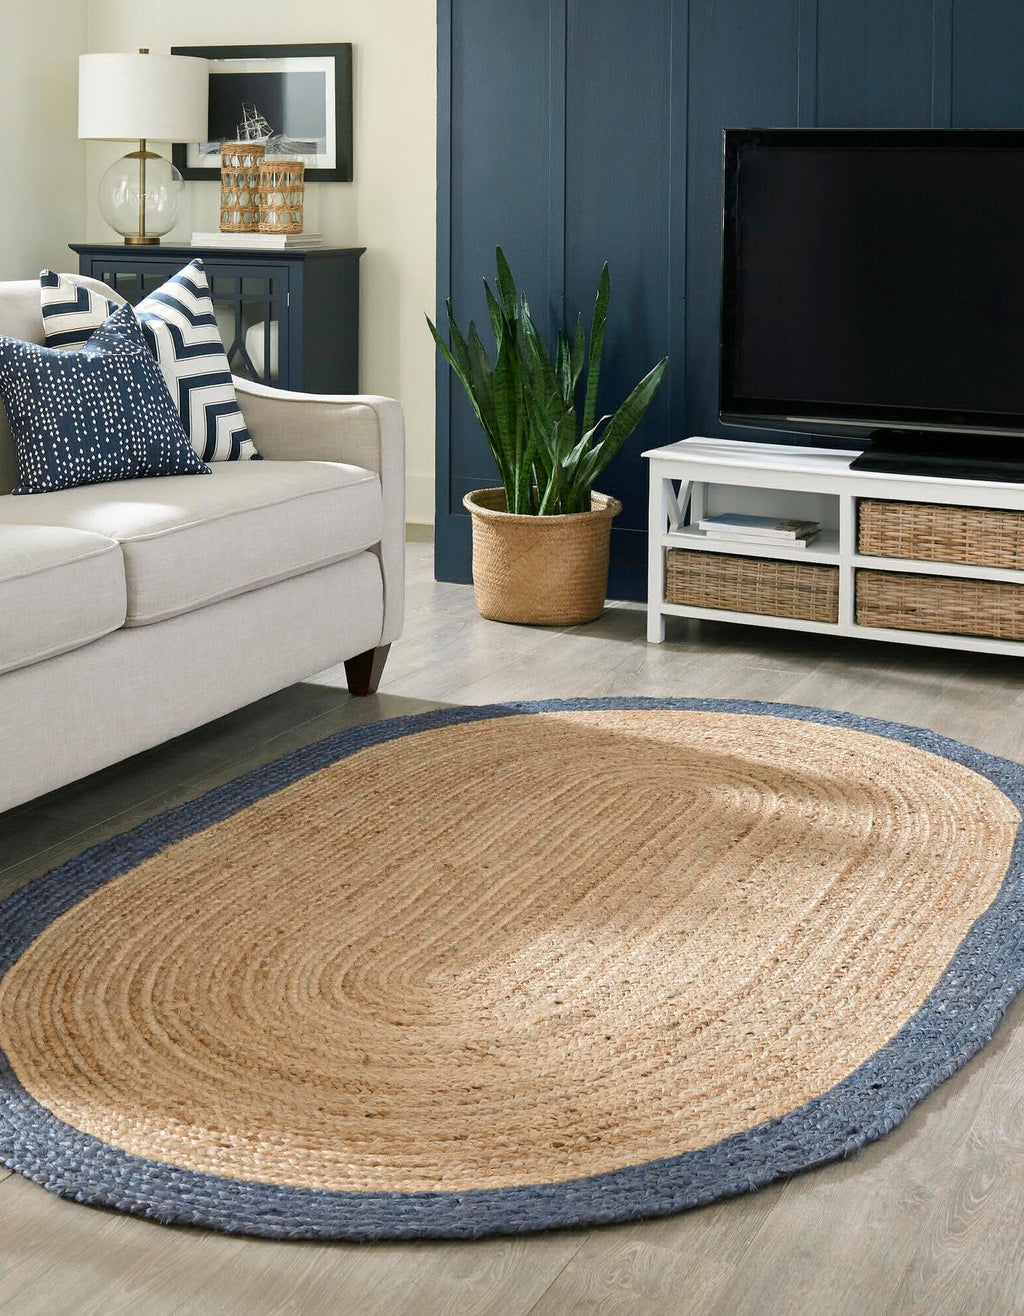 Unique Loom Braided Jute MGN-4 Natural Area Rug Oval Lifestyle Image Feature